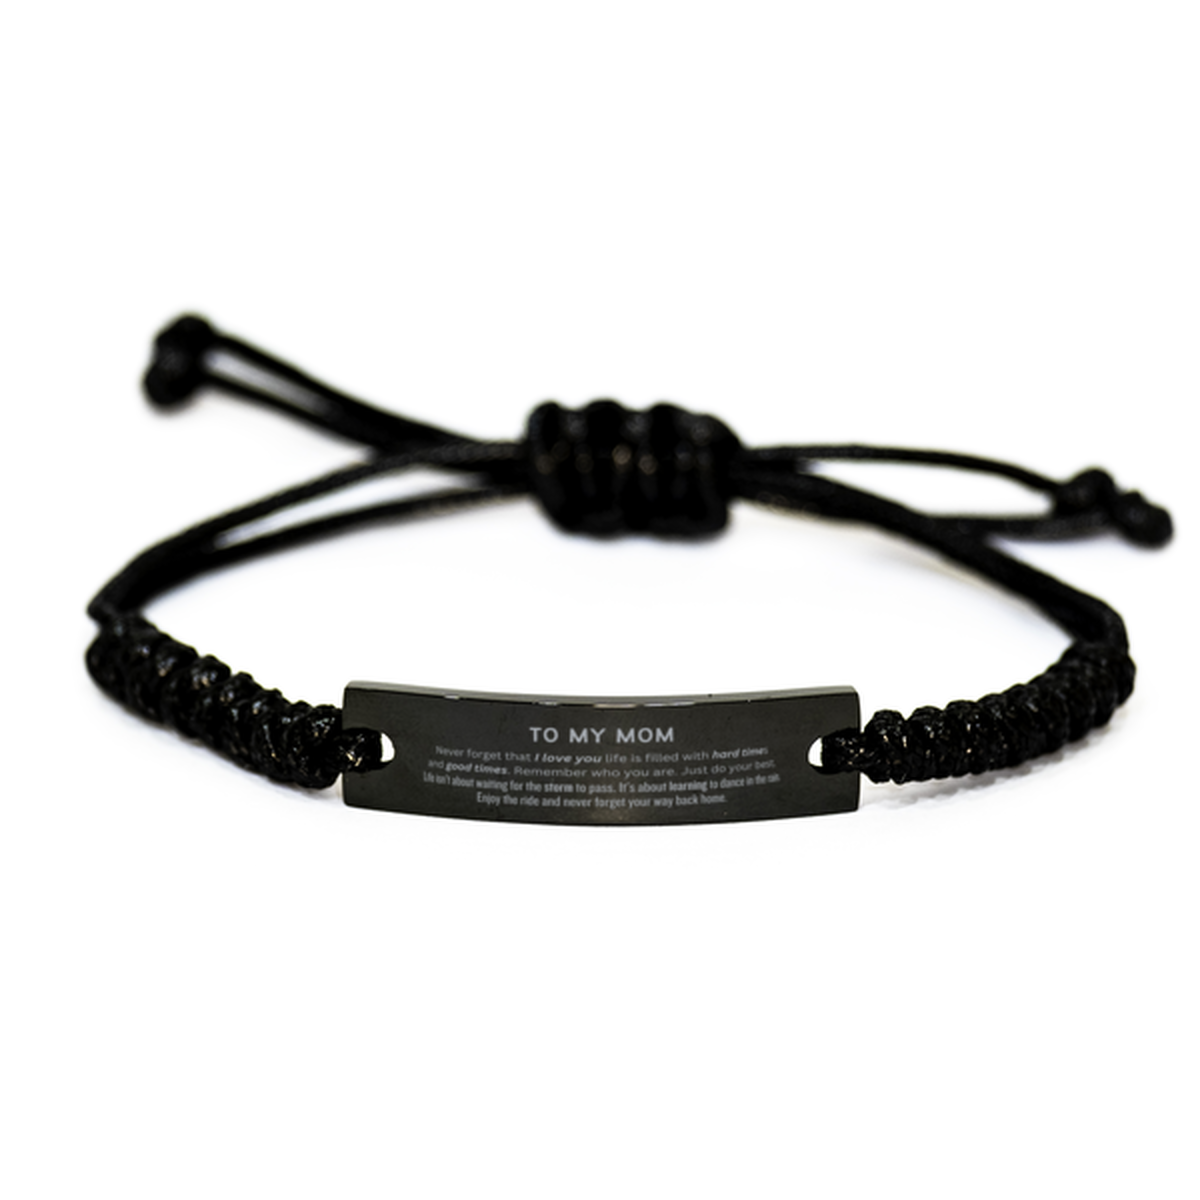 Christmas Mom Black Rope Bracelet Gifts, To My Mom Birthday Thank You Gifts For Mom, Graduation Unique Gifts For Mom To My Mom Never forget that I love you life is filled with hard times and good times. Remember who you are. Just do your best